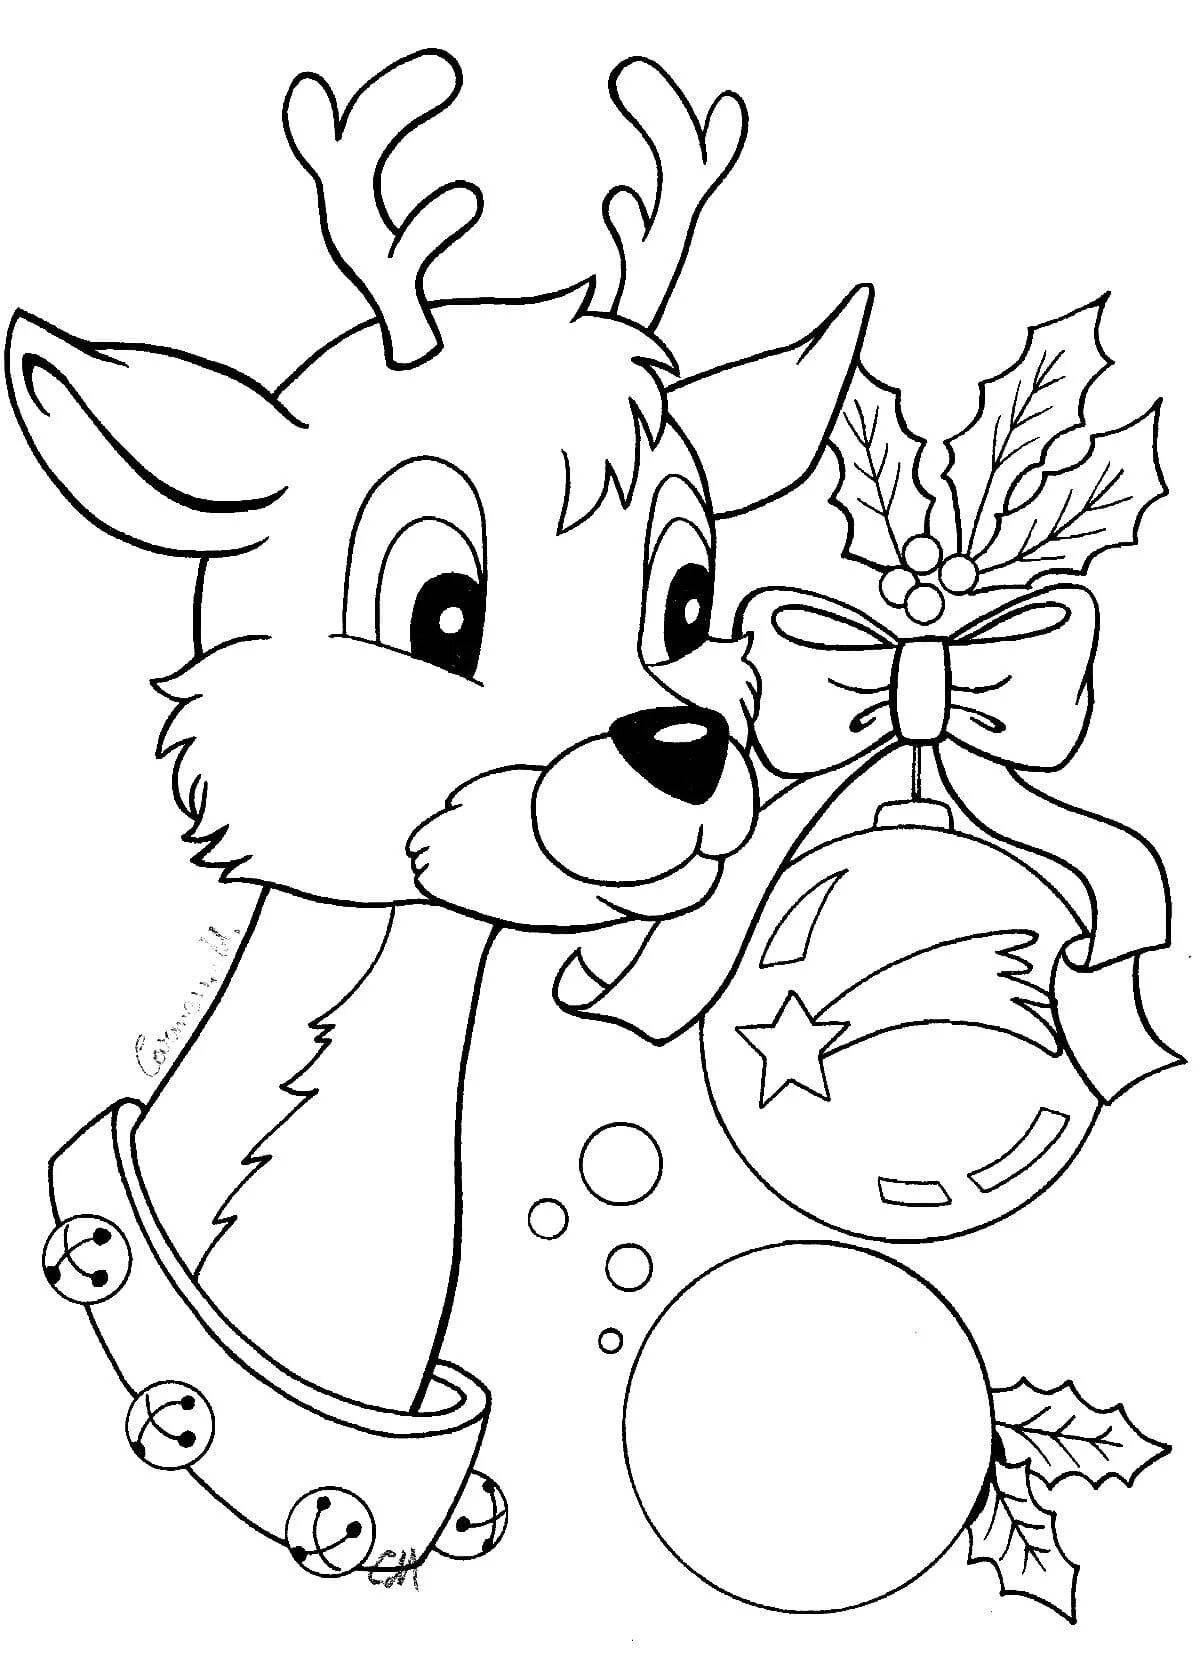 Merry Christmas coloring book 2023